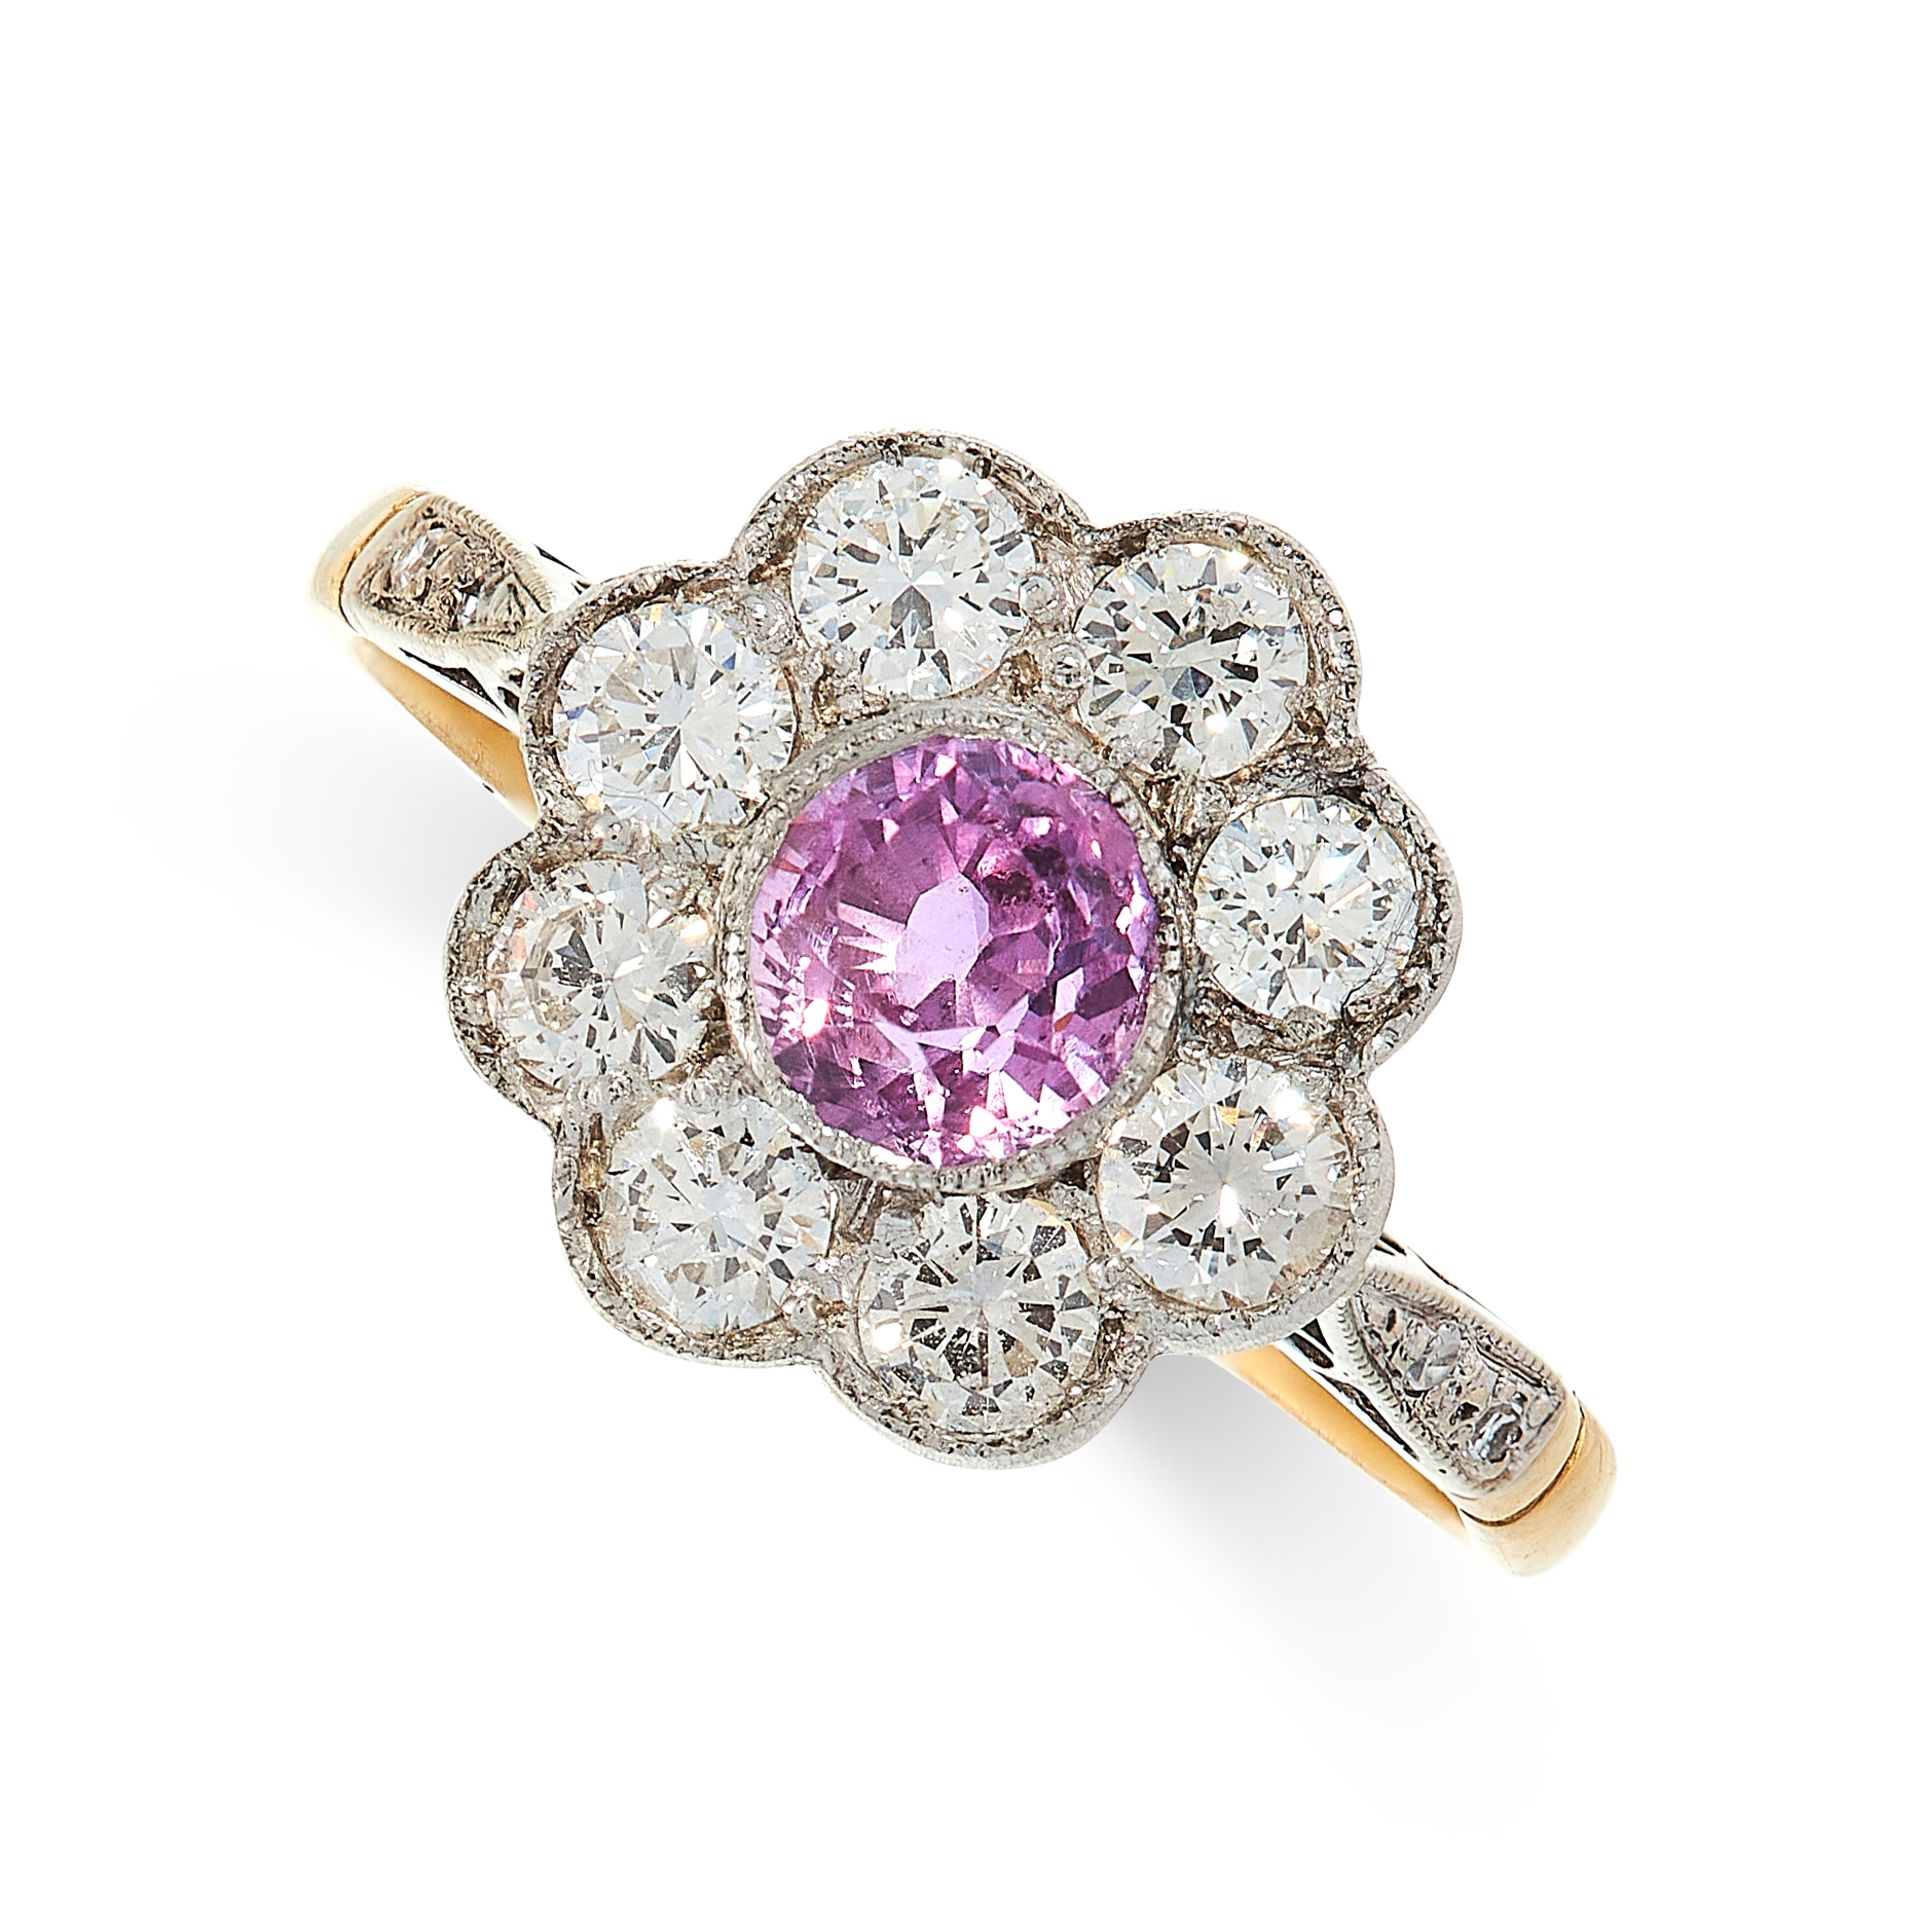 PINK SAPPHIRE AND DIAMOND DRESS RING in 18ct yellow gold, set with a round cut pink sapphire of 0.97